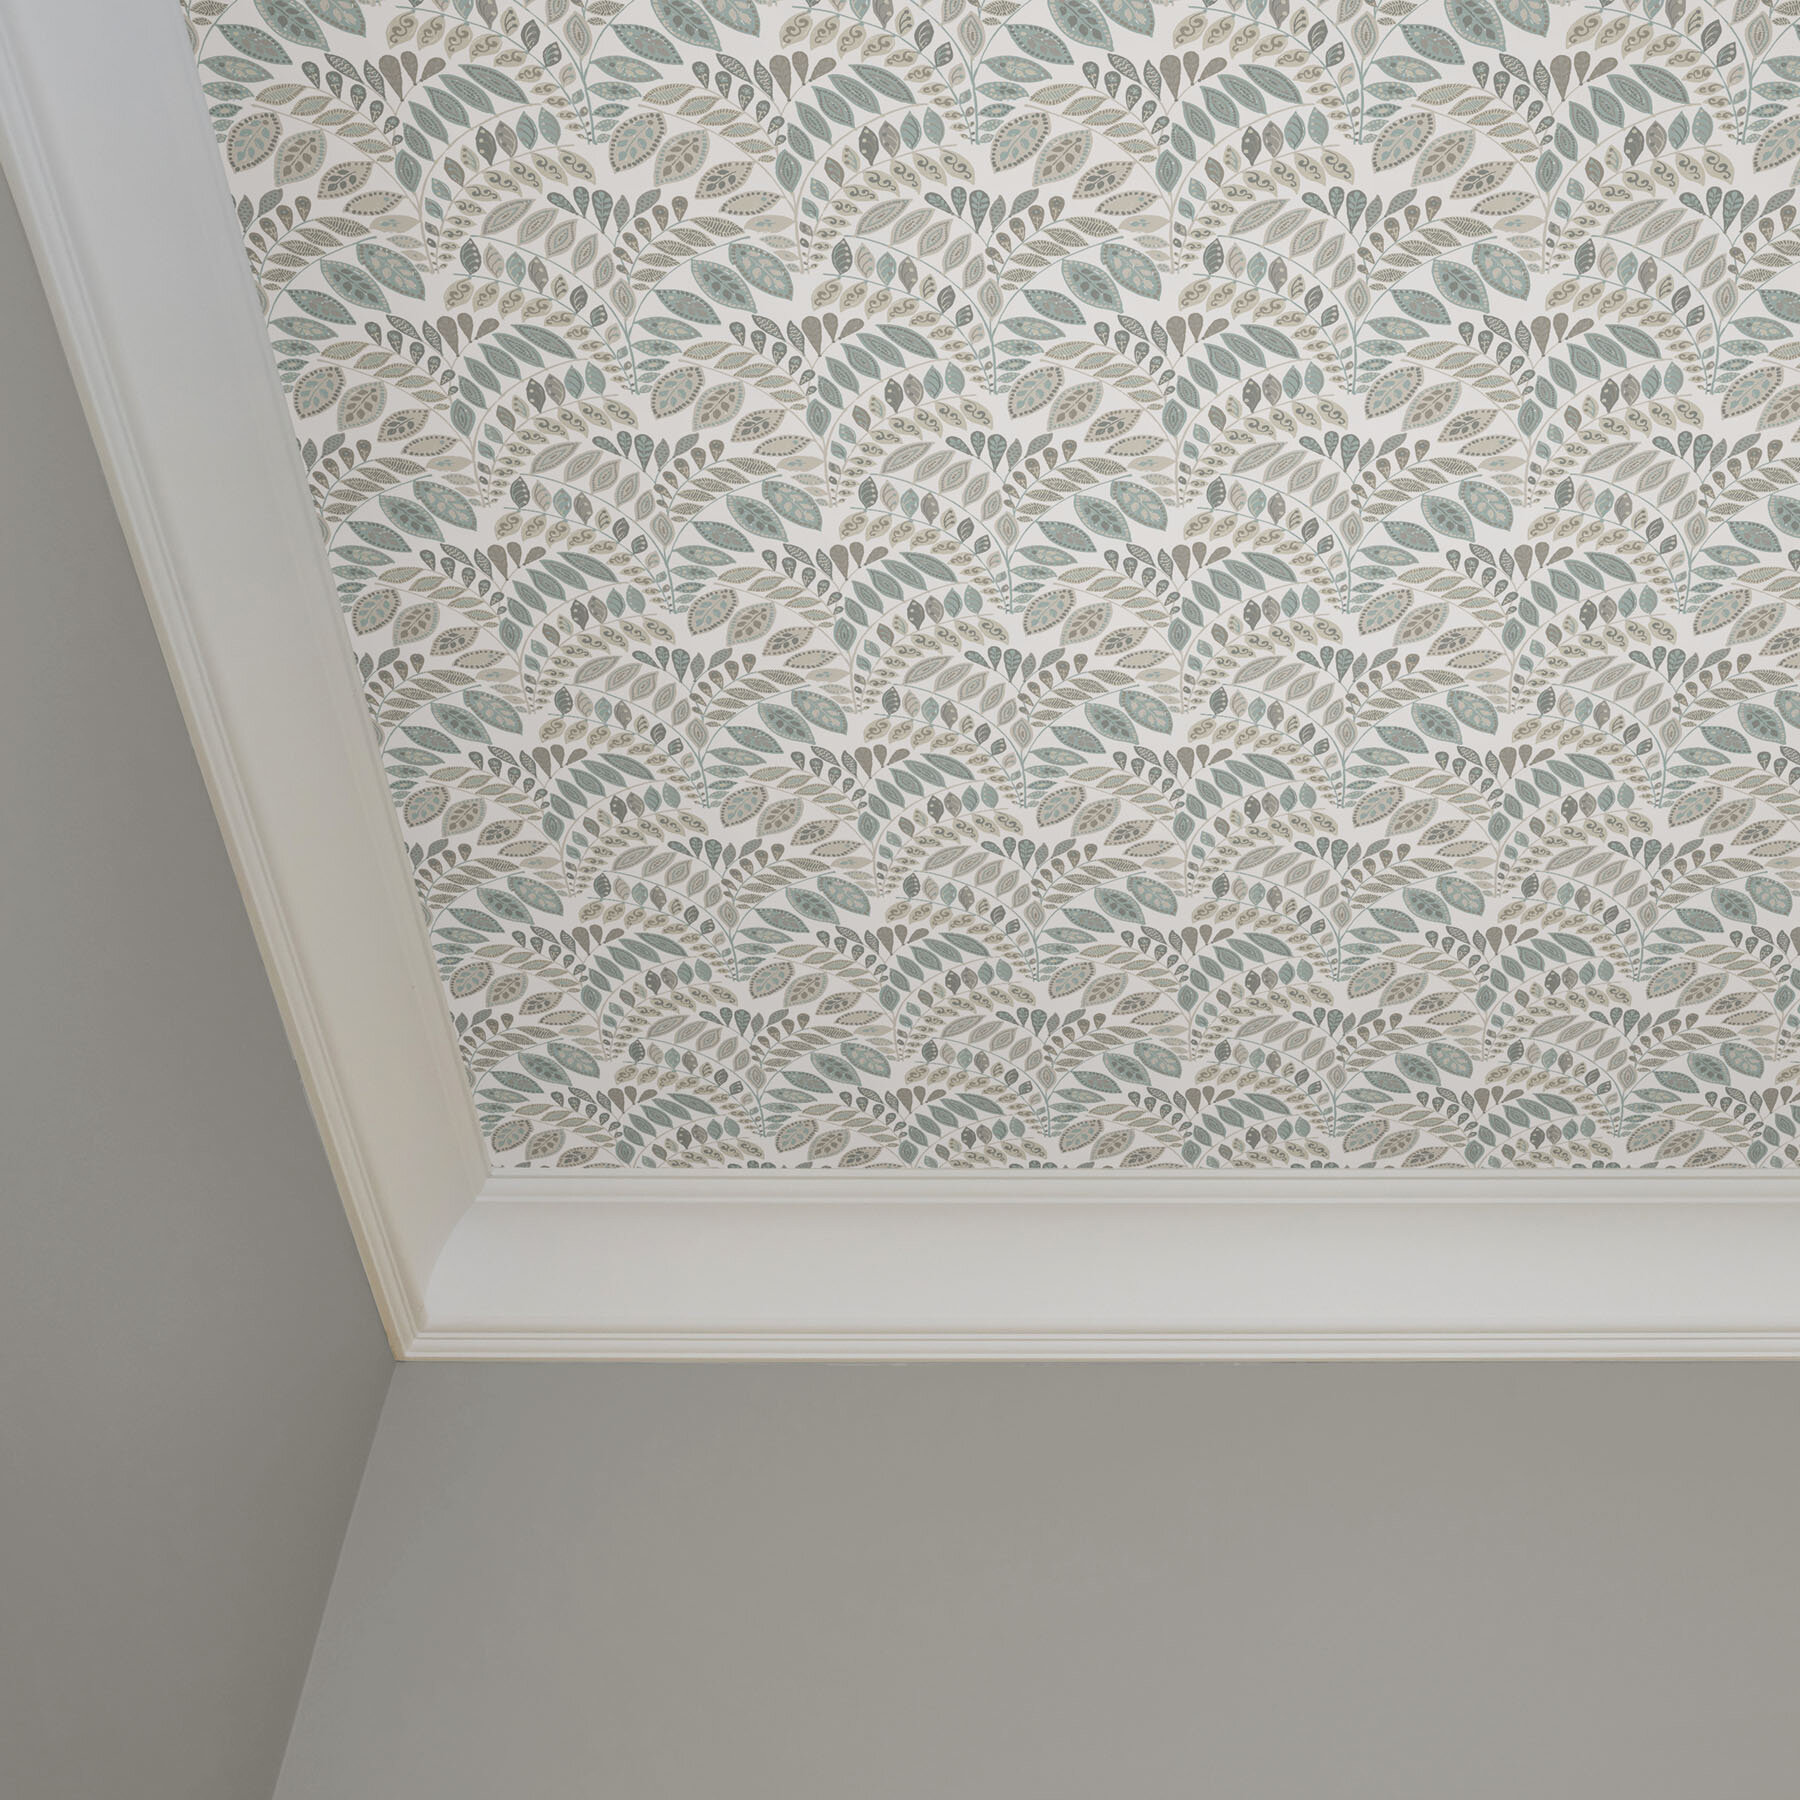 These peelandstick wallpapers are a lowcommitment way to add lots of  impact to a room  CBC Life